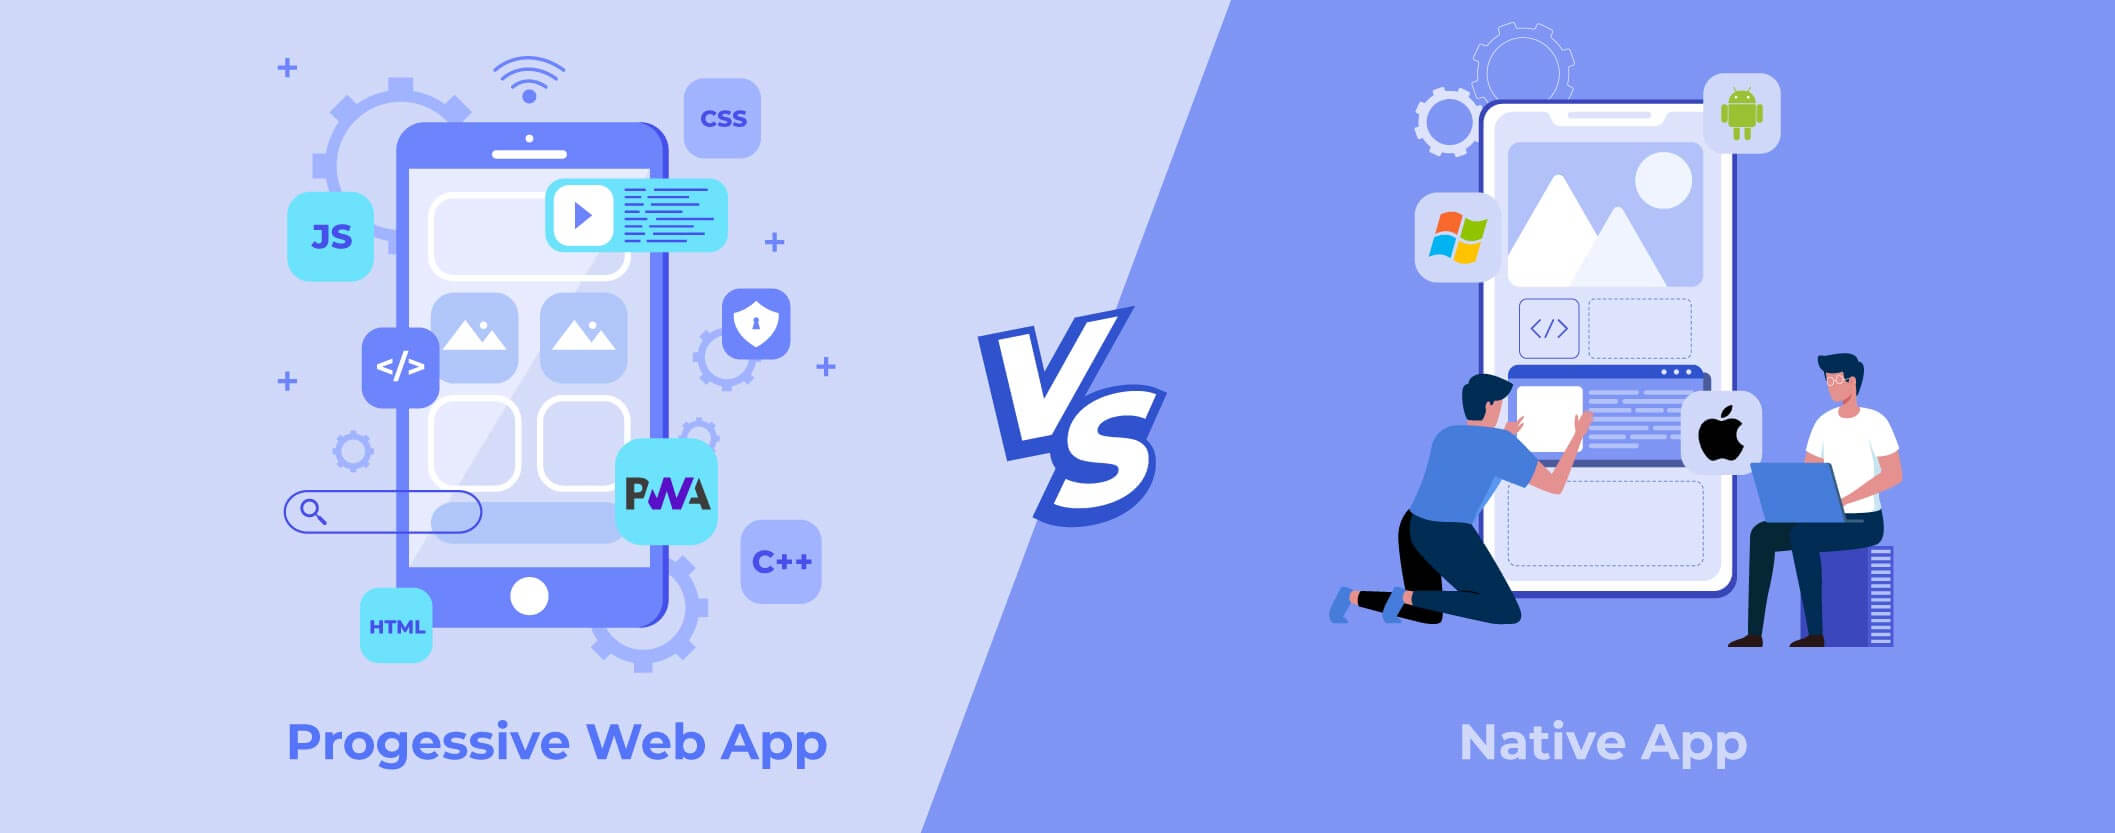 Progressive Web App vs Native App: Which Is Right for Your Business